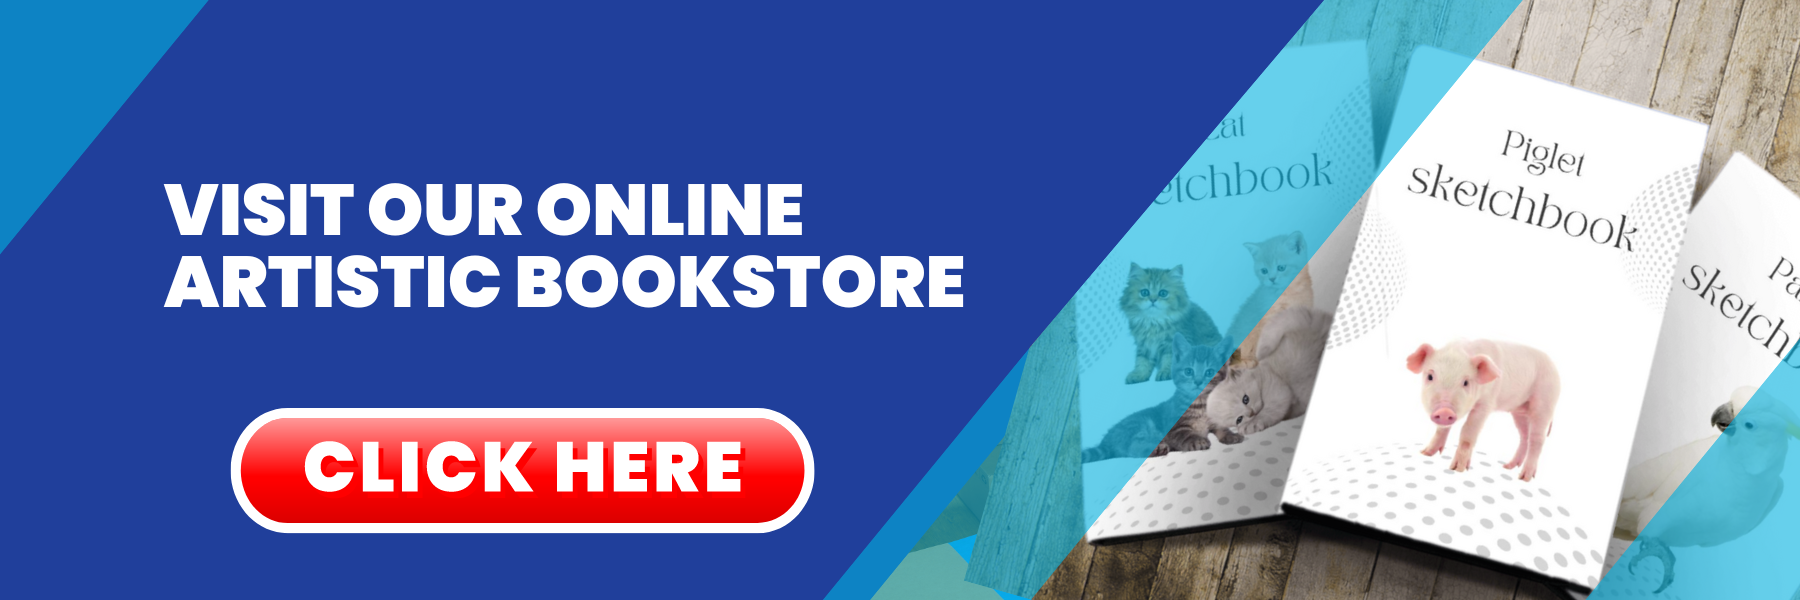 Visit Our Online Bookstore